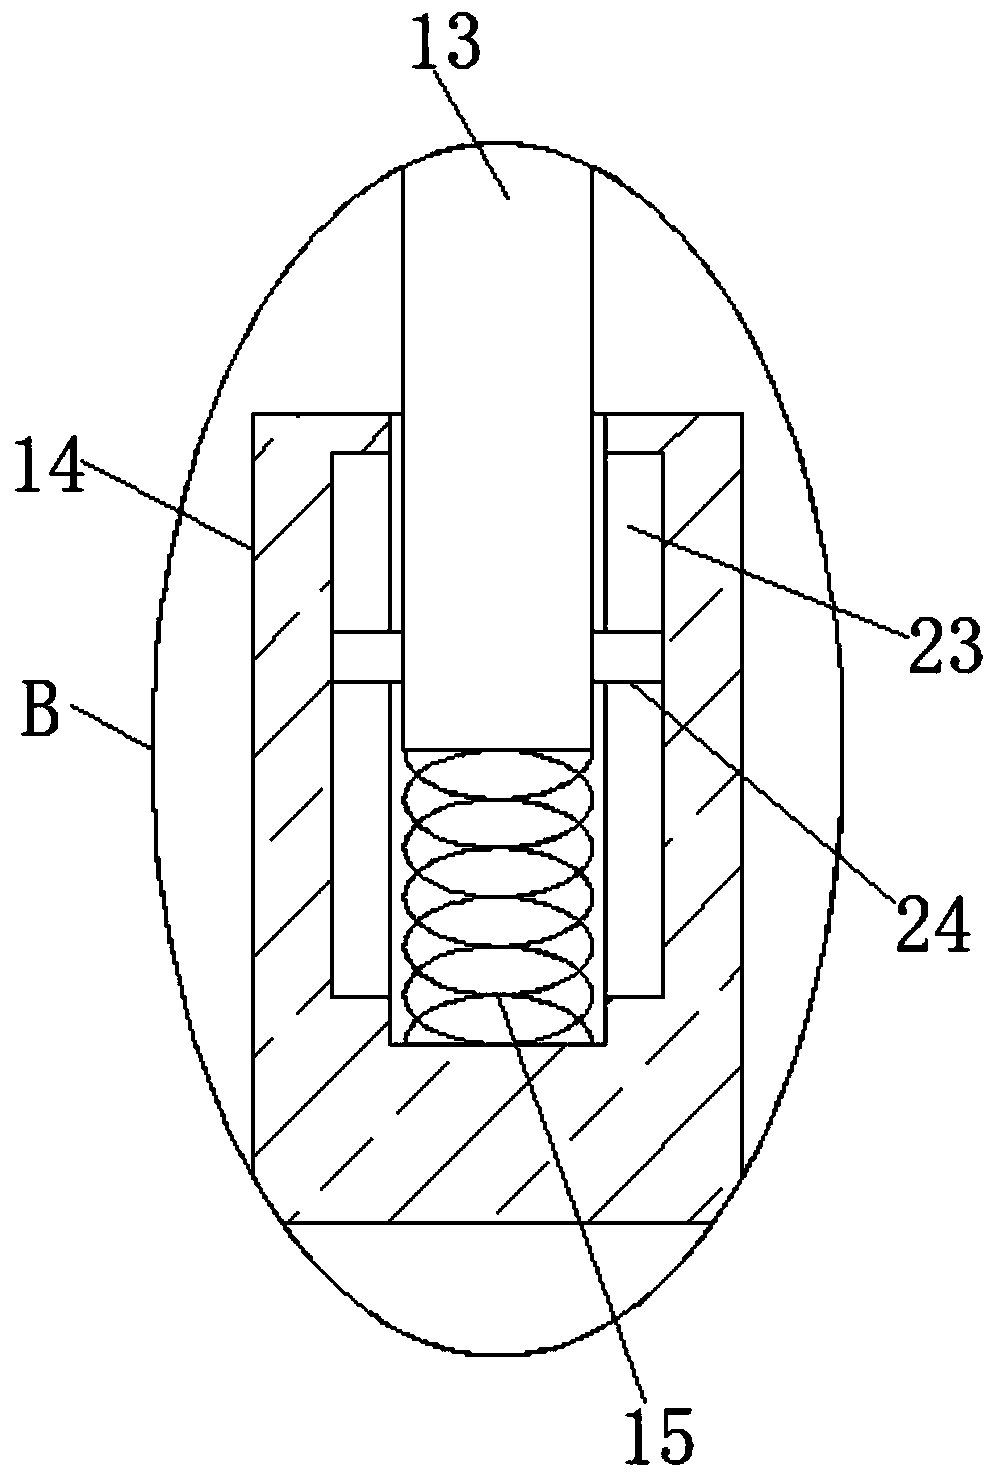 Motor with fixation protection function